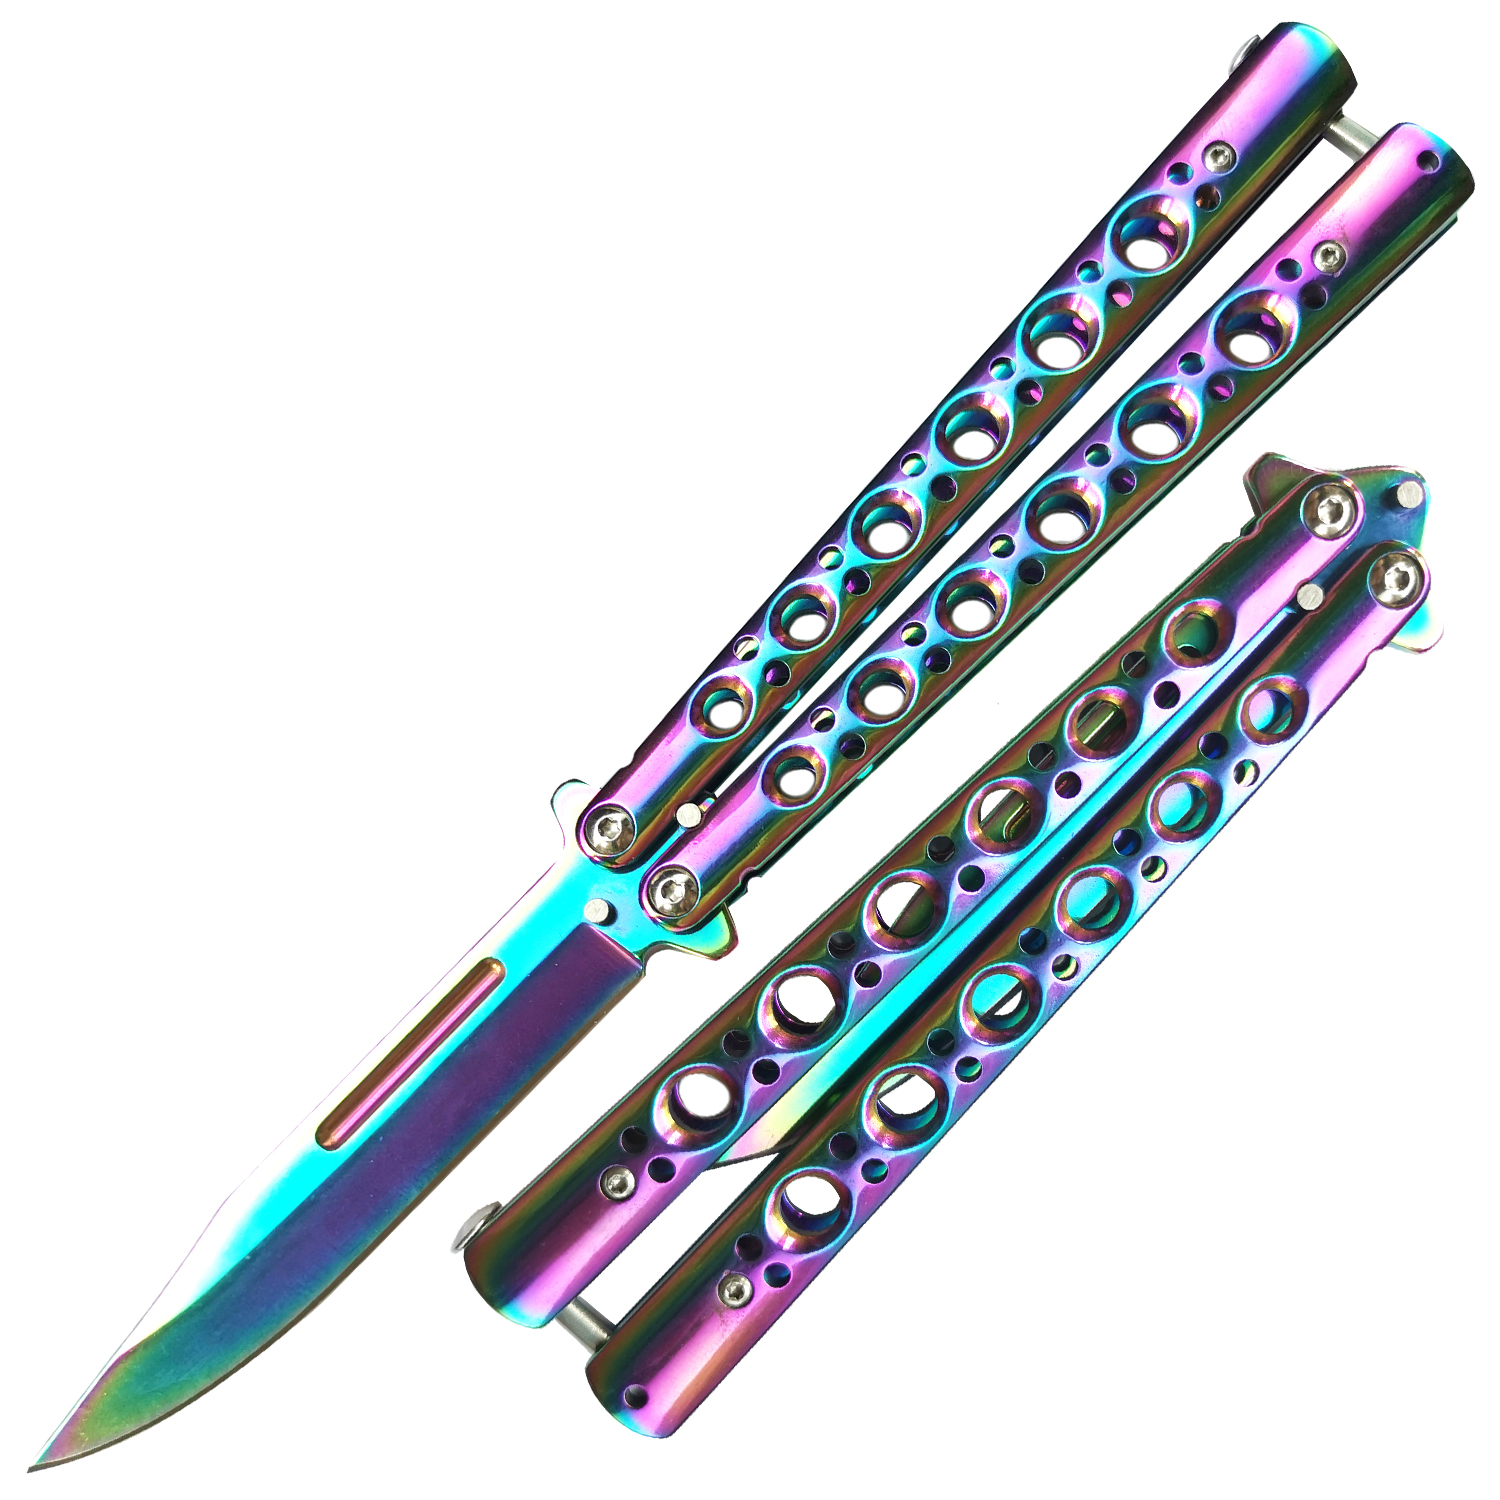 Viper Tec Scorpion Tip Balisong Knife Stainless